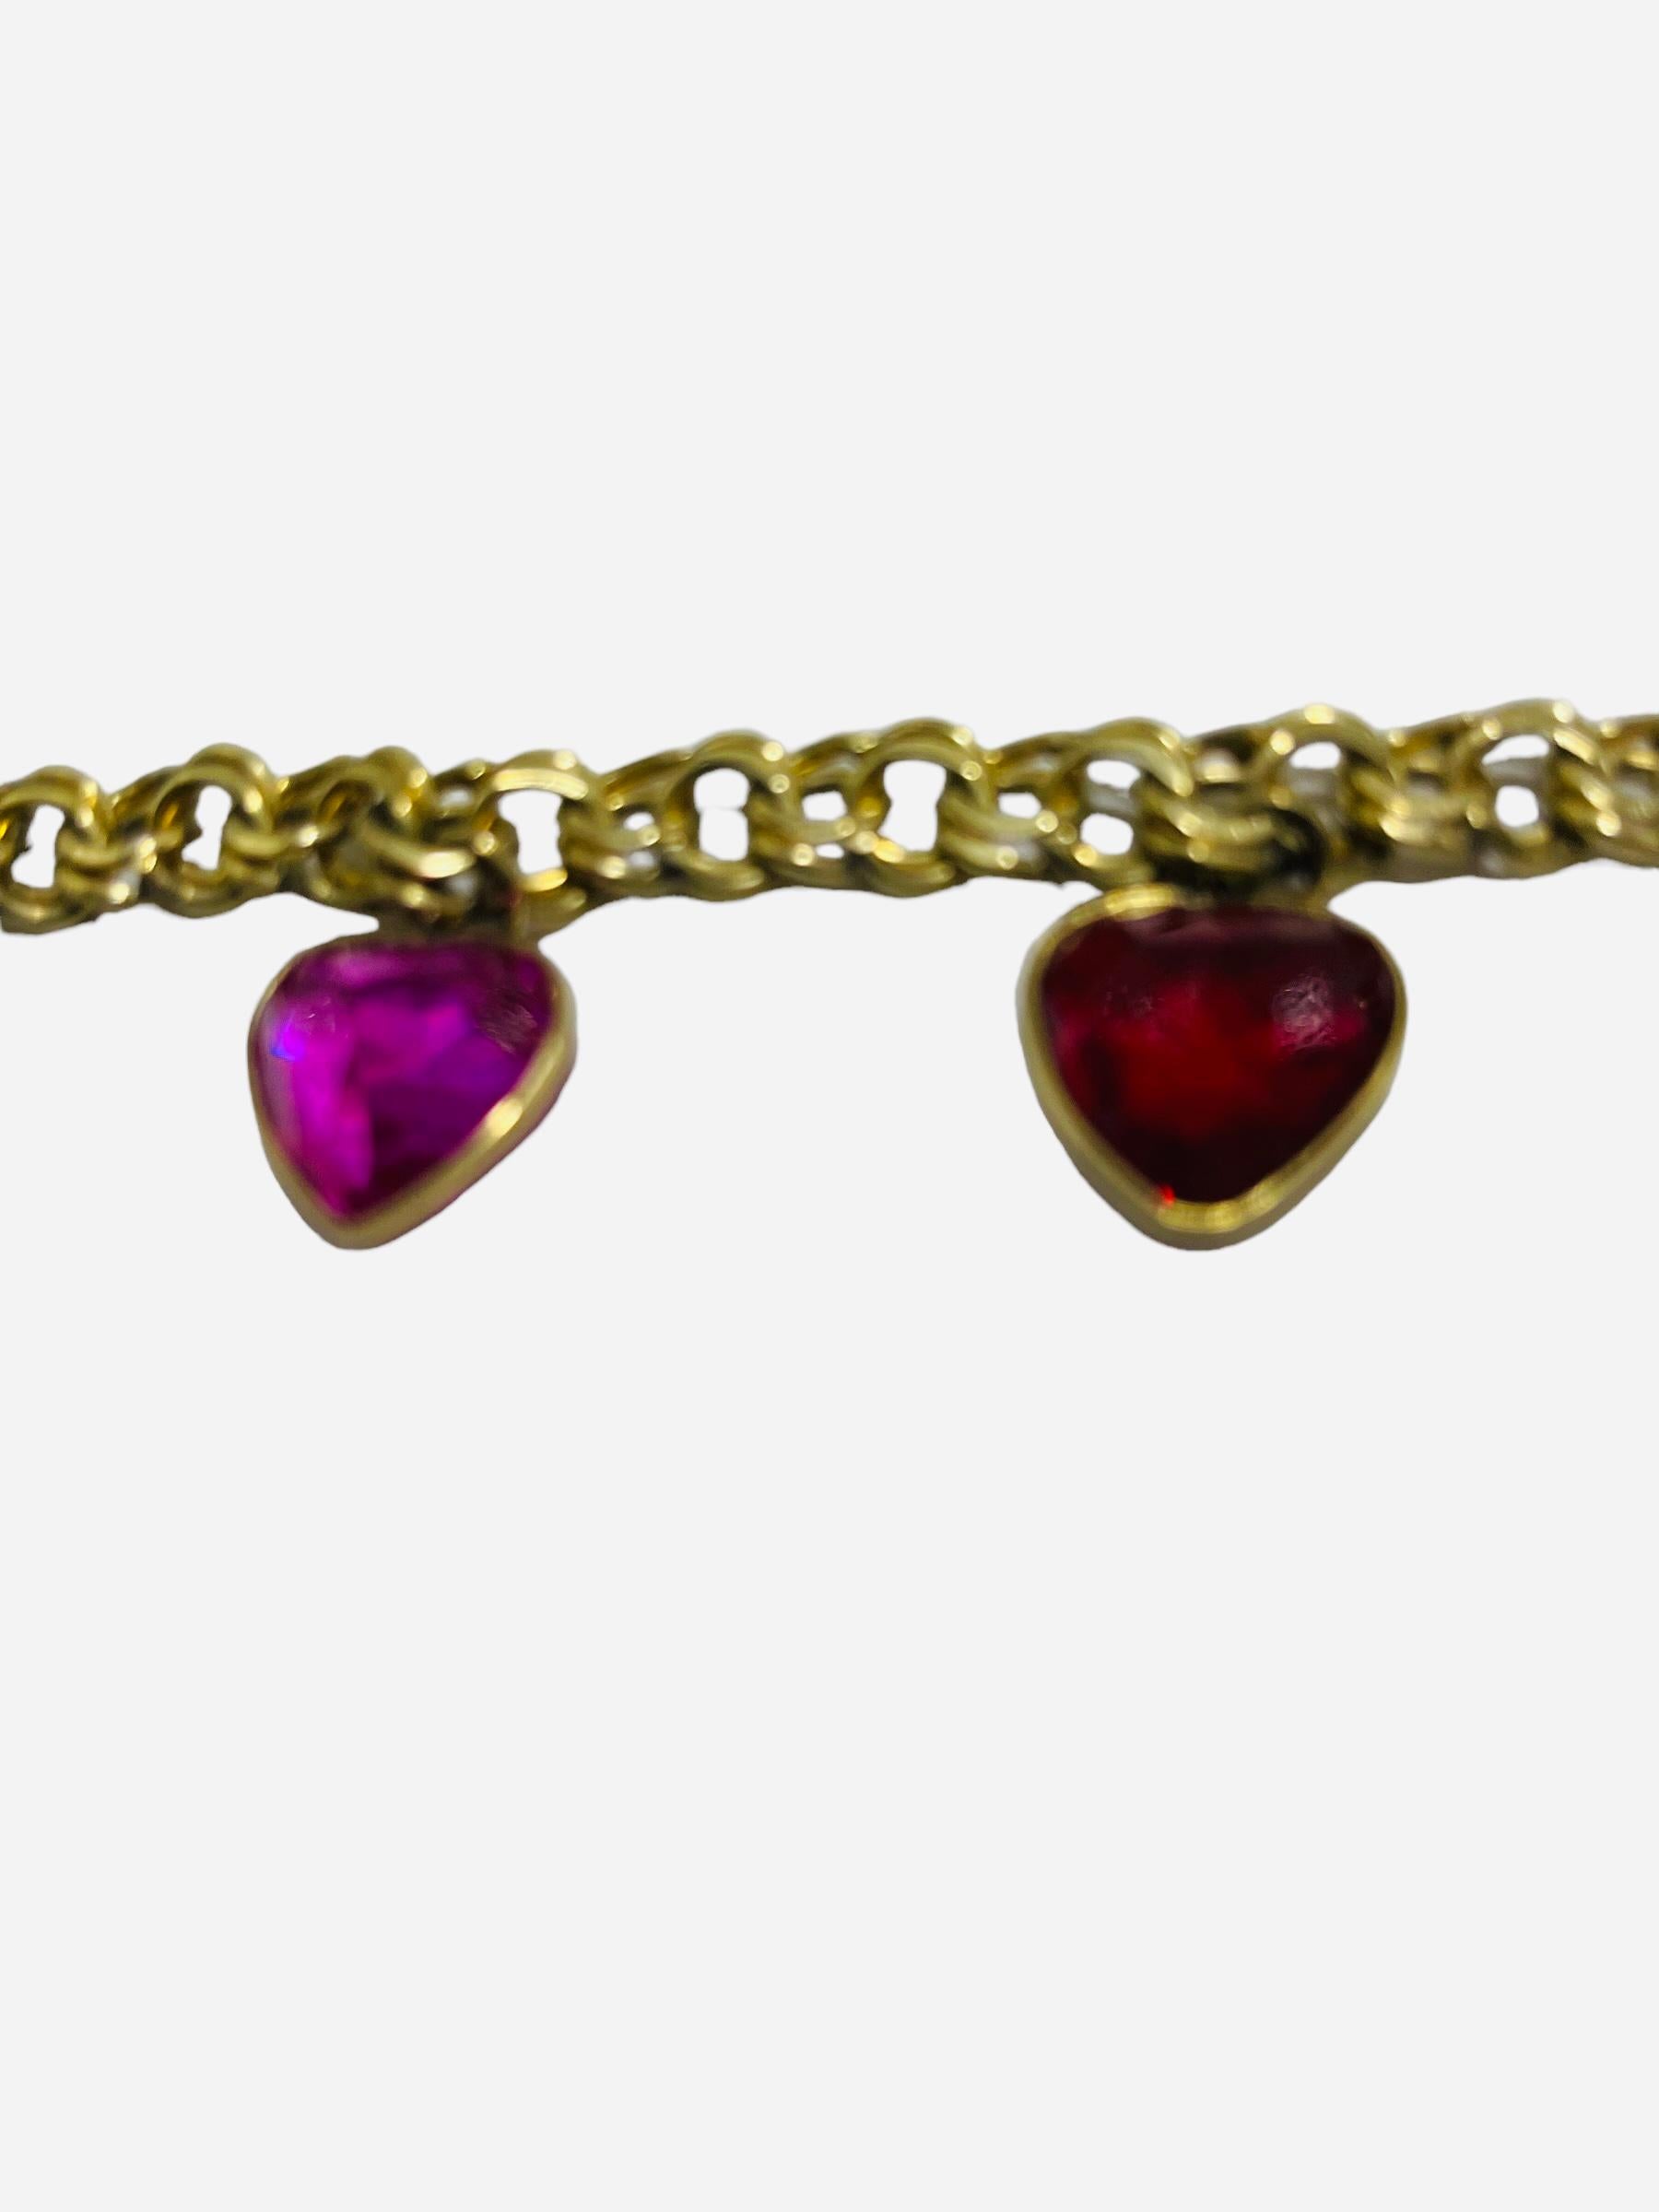 14K Yellow Gold Zircon Heart Charms Open Chino Link Bracelet  In Good Condition For Sale In Guaynabo, PR